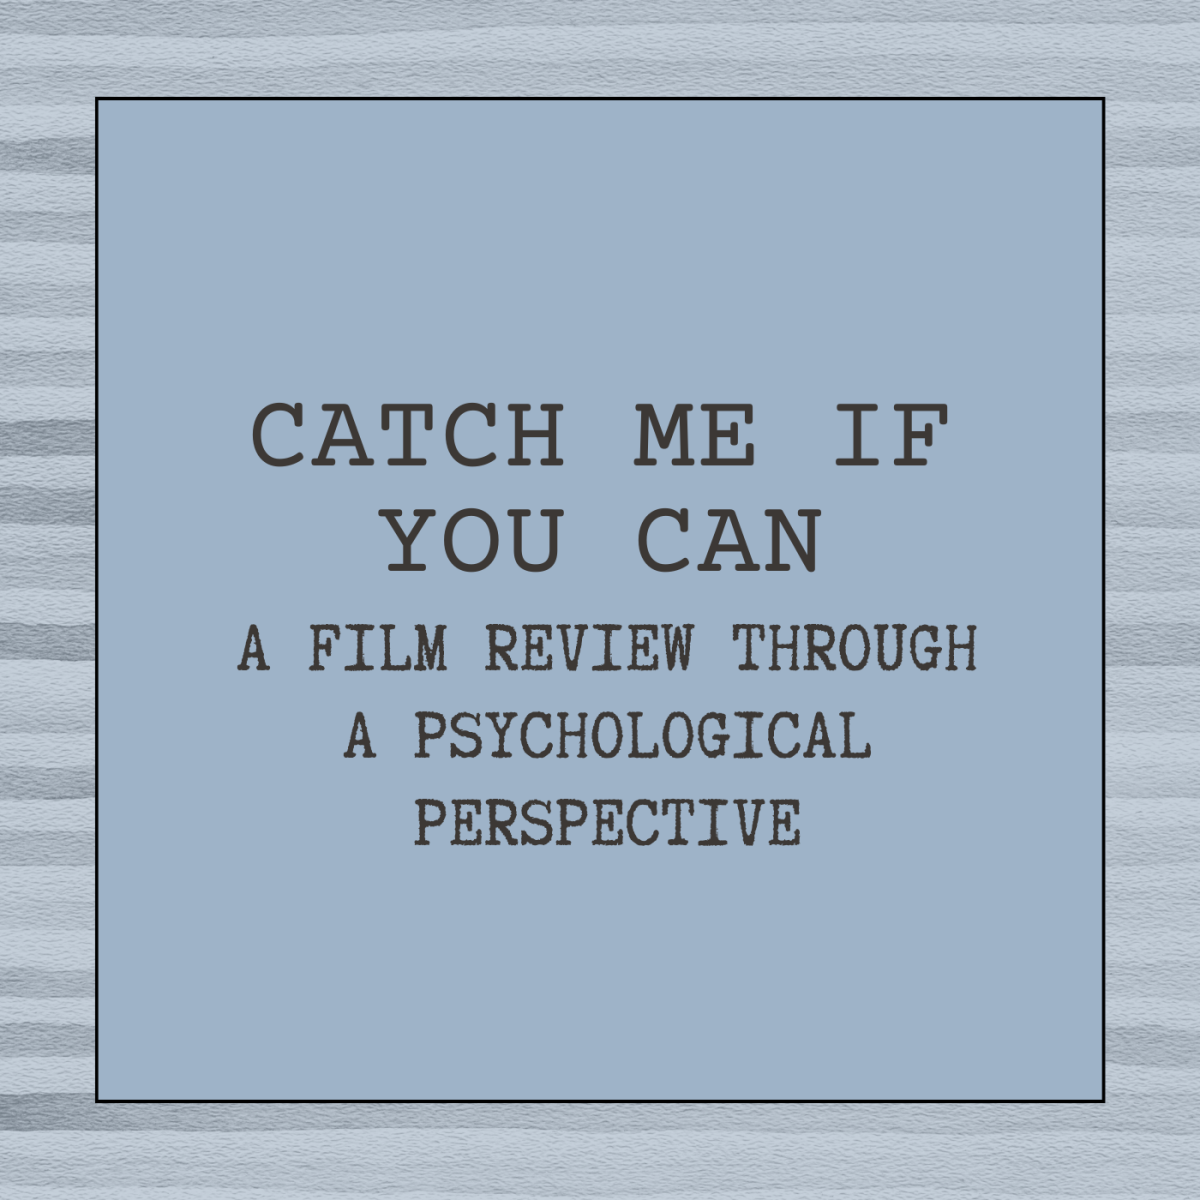 Catch Me If You Can: A Film Review Through a Psychological Perspective